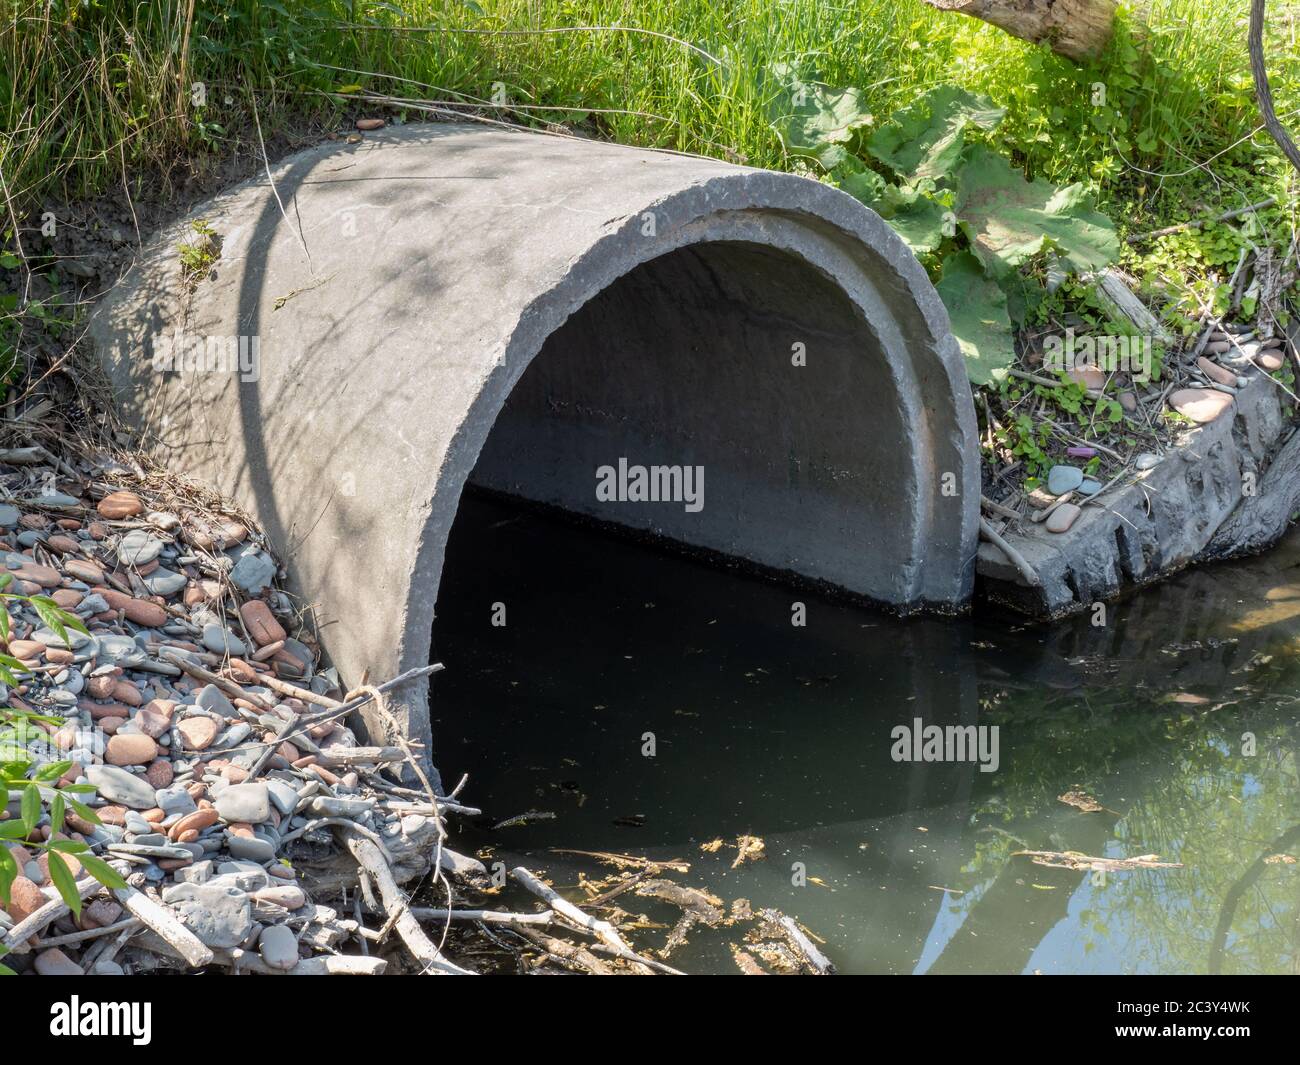 a large concrete drain culvert filled with polluted water surrounded by green bushes Stock Photo